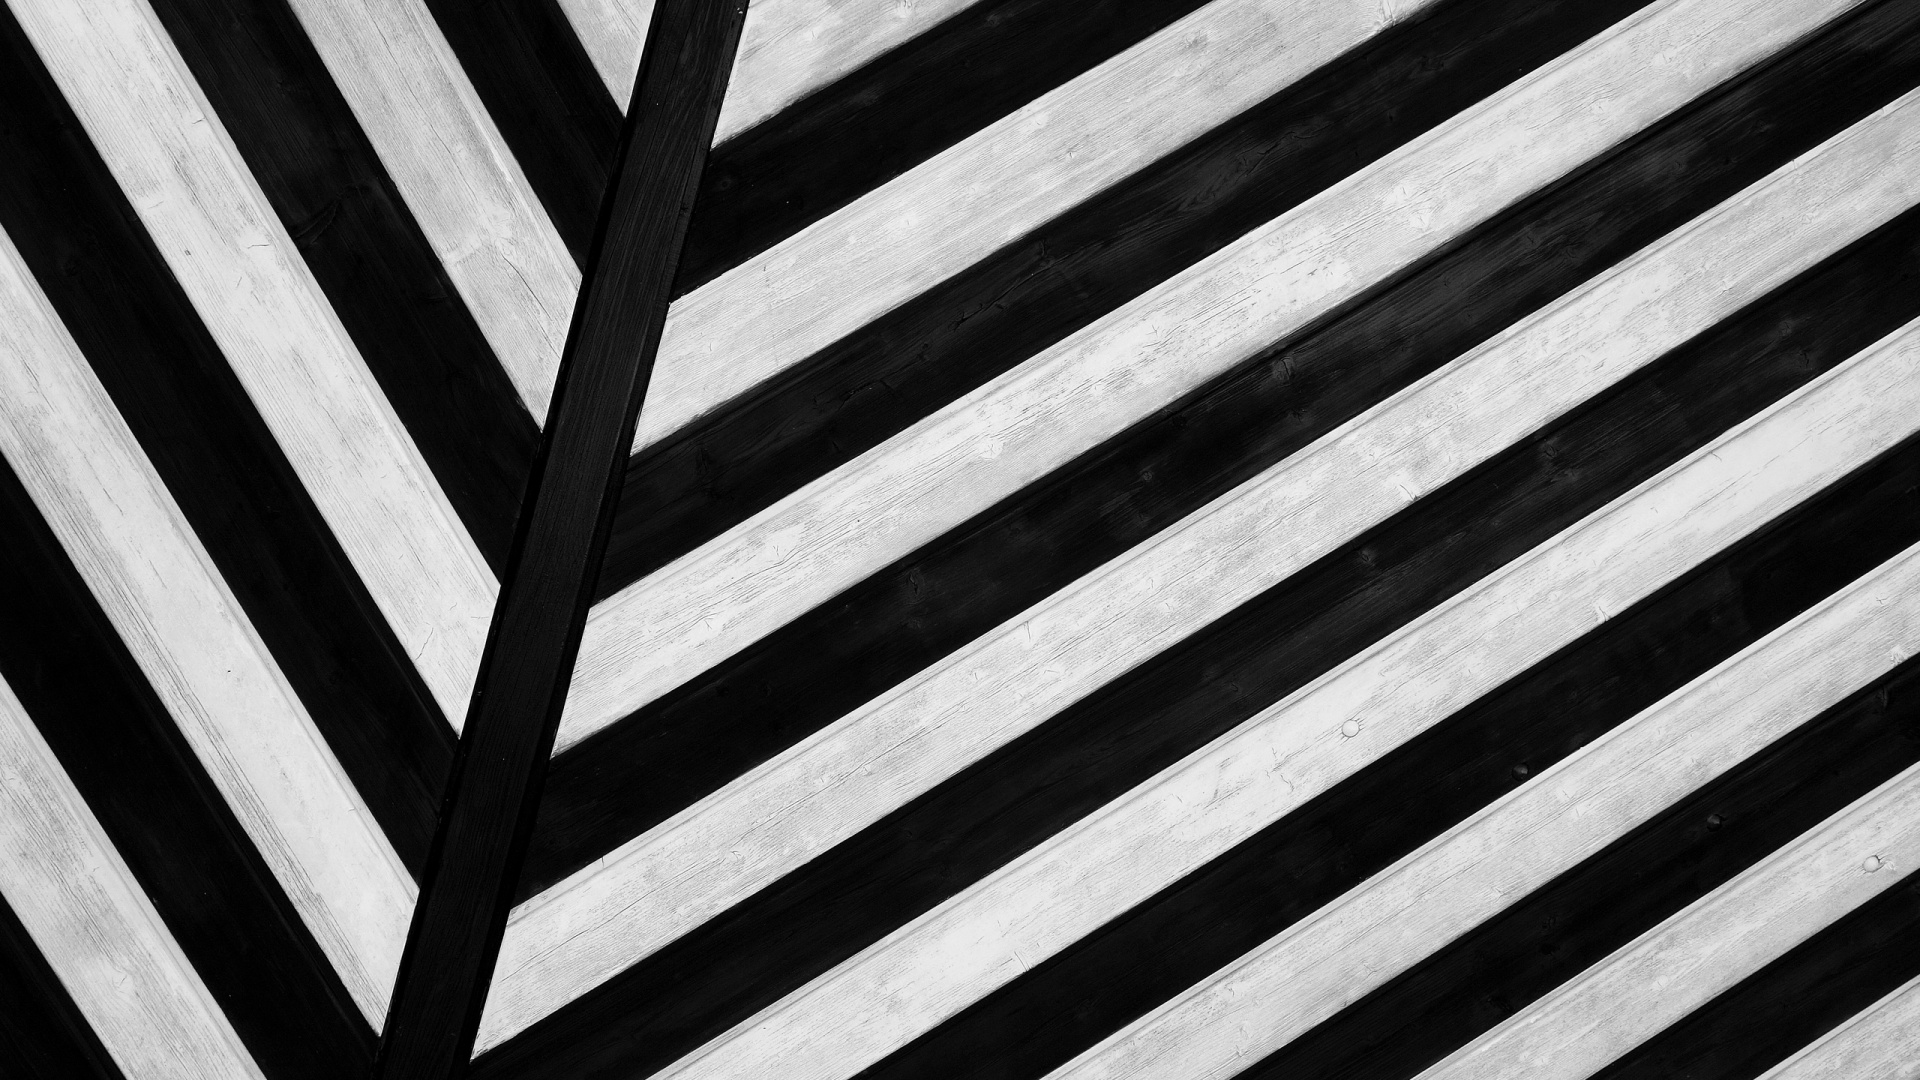 Black and White Striped Textile. Wallpaper in 1920x1080 Resolution